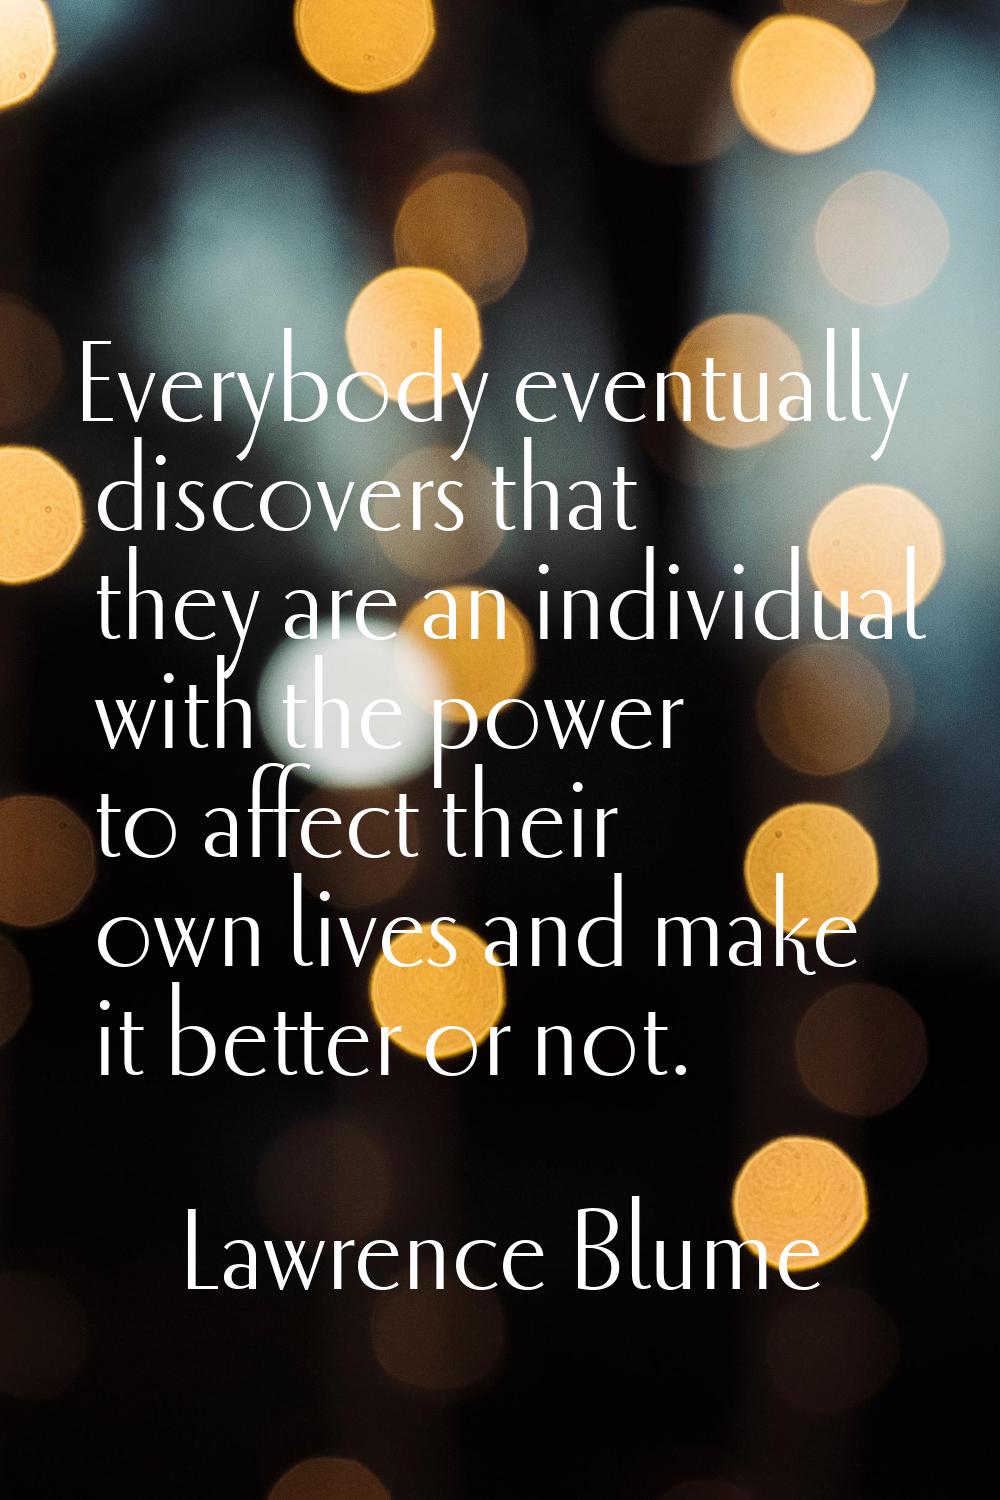 Everybody eventually discovers that they are an individual with the power to affect their own lives